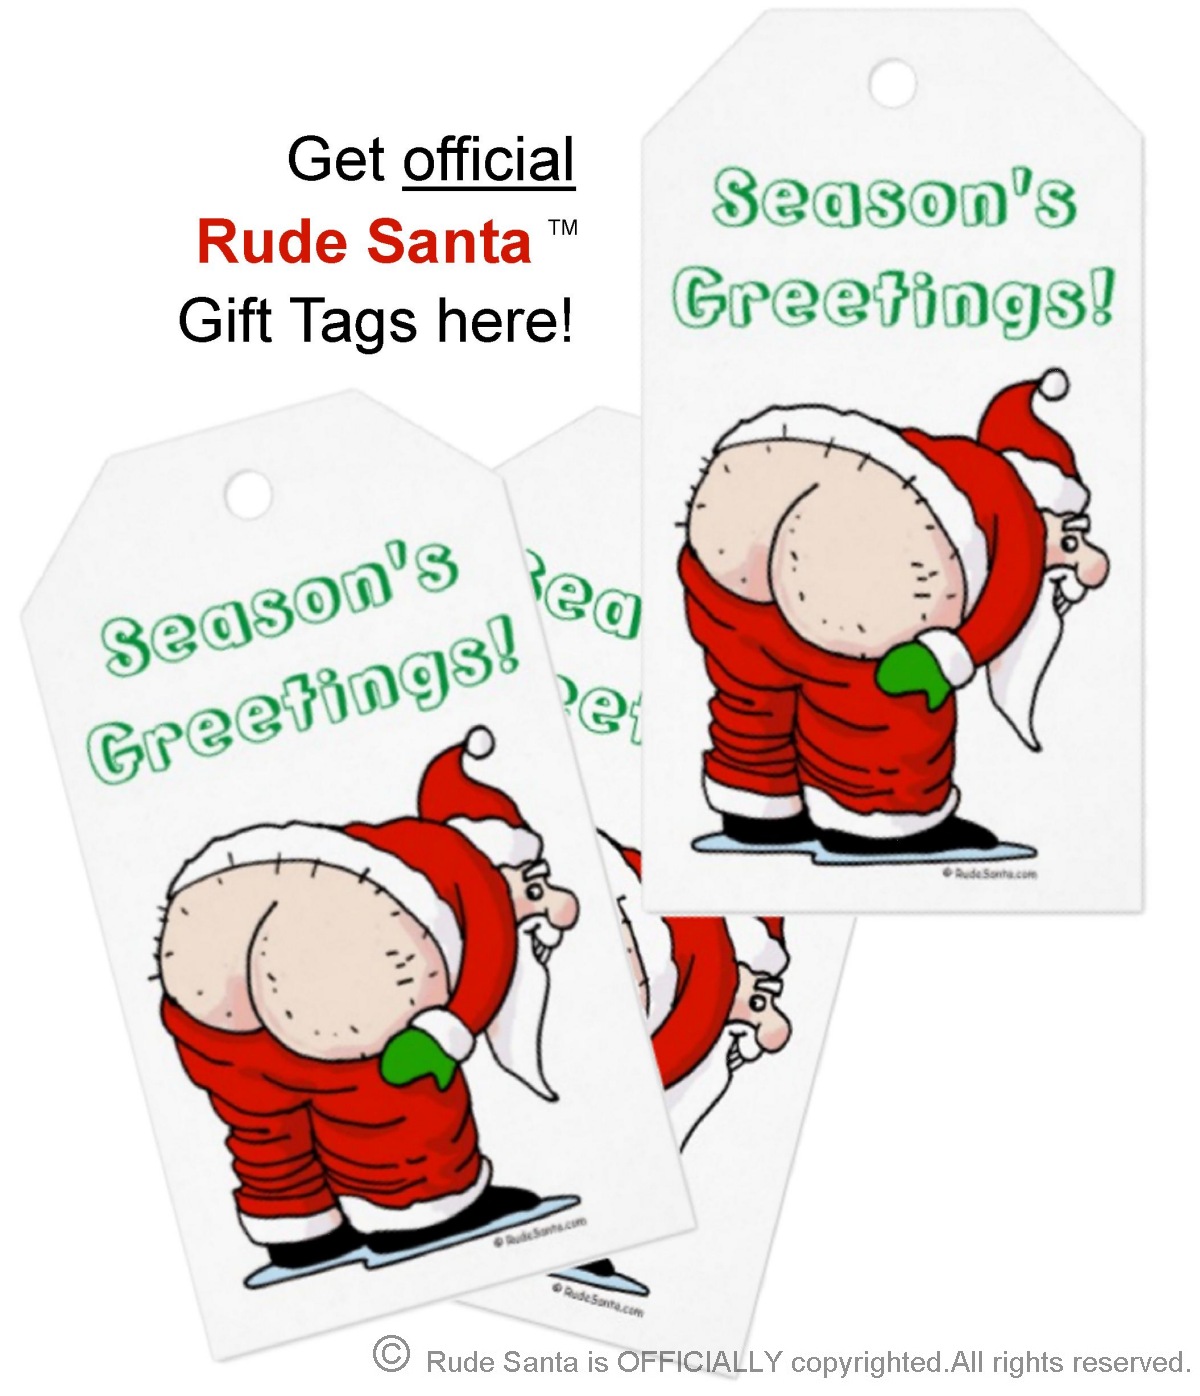 Get Your Official Rude Santa Gift Tags Here